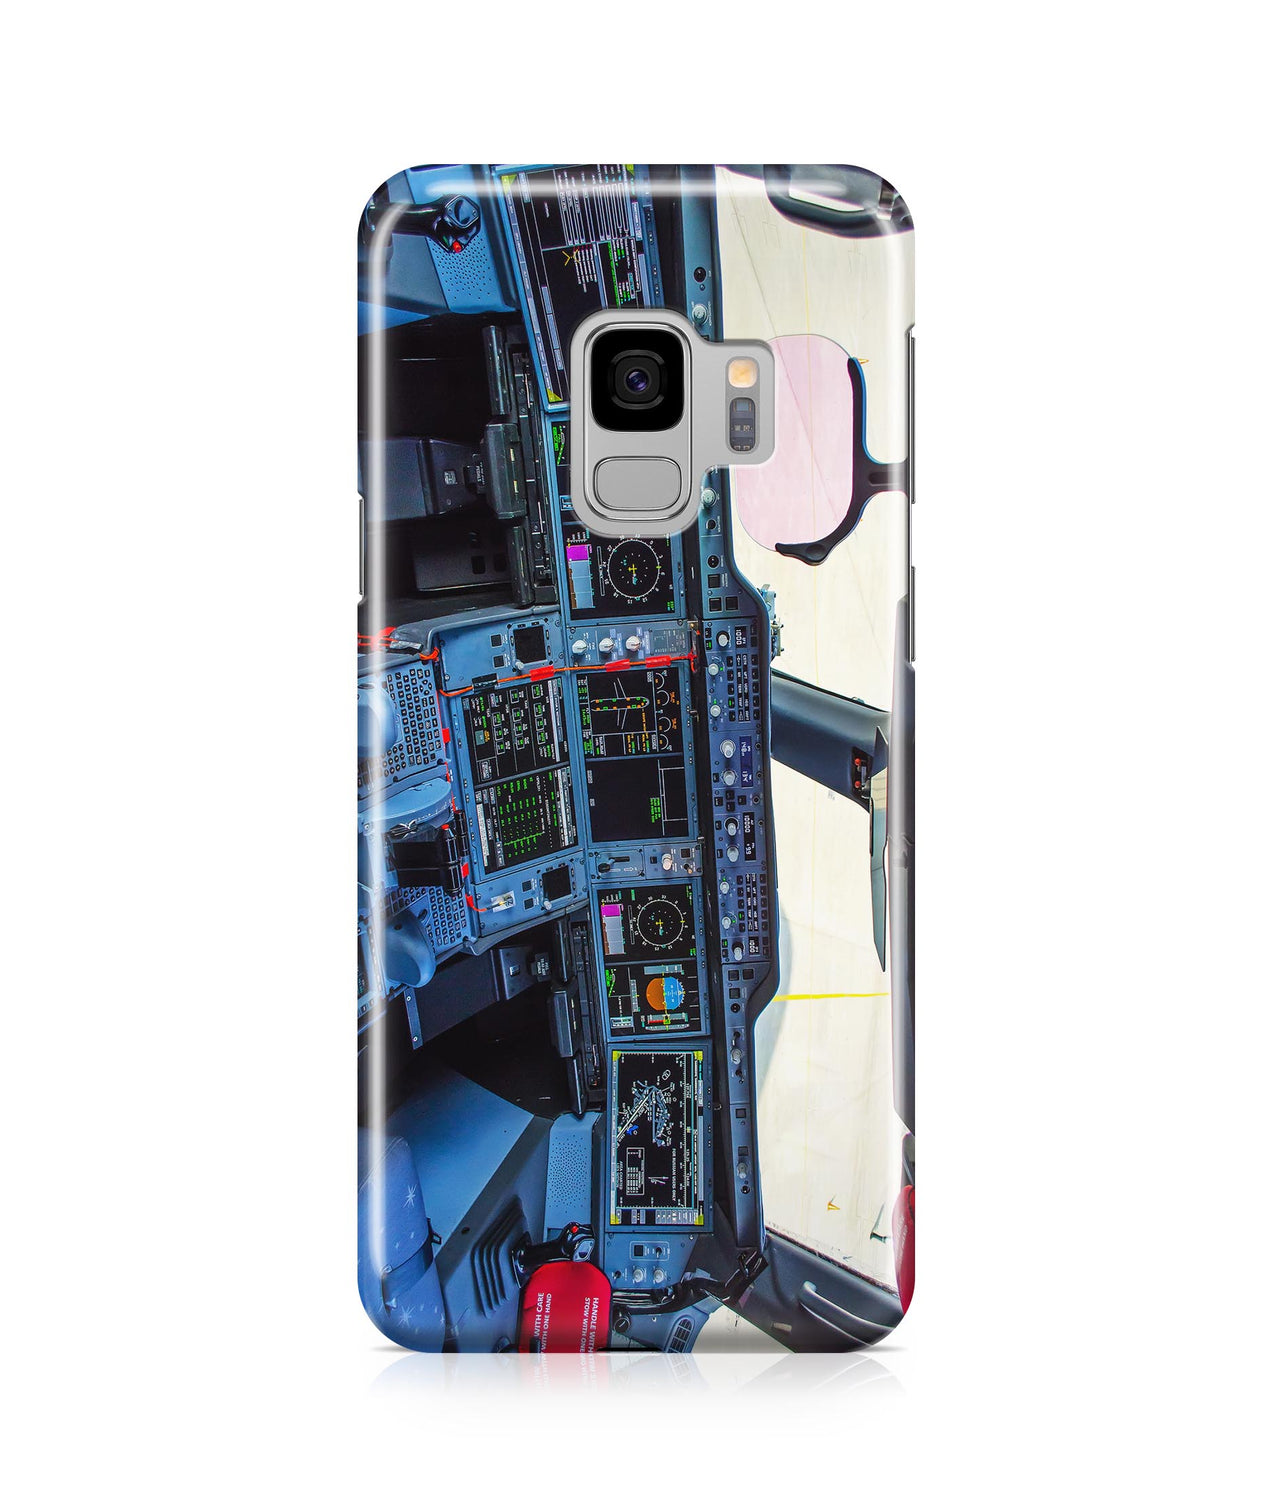 Airbus A350 Cockpit Printed Samsung J Cases